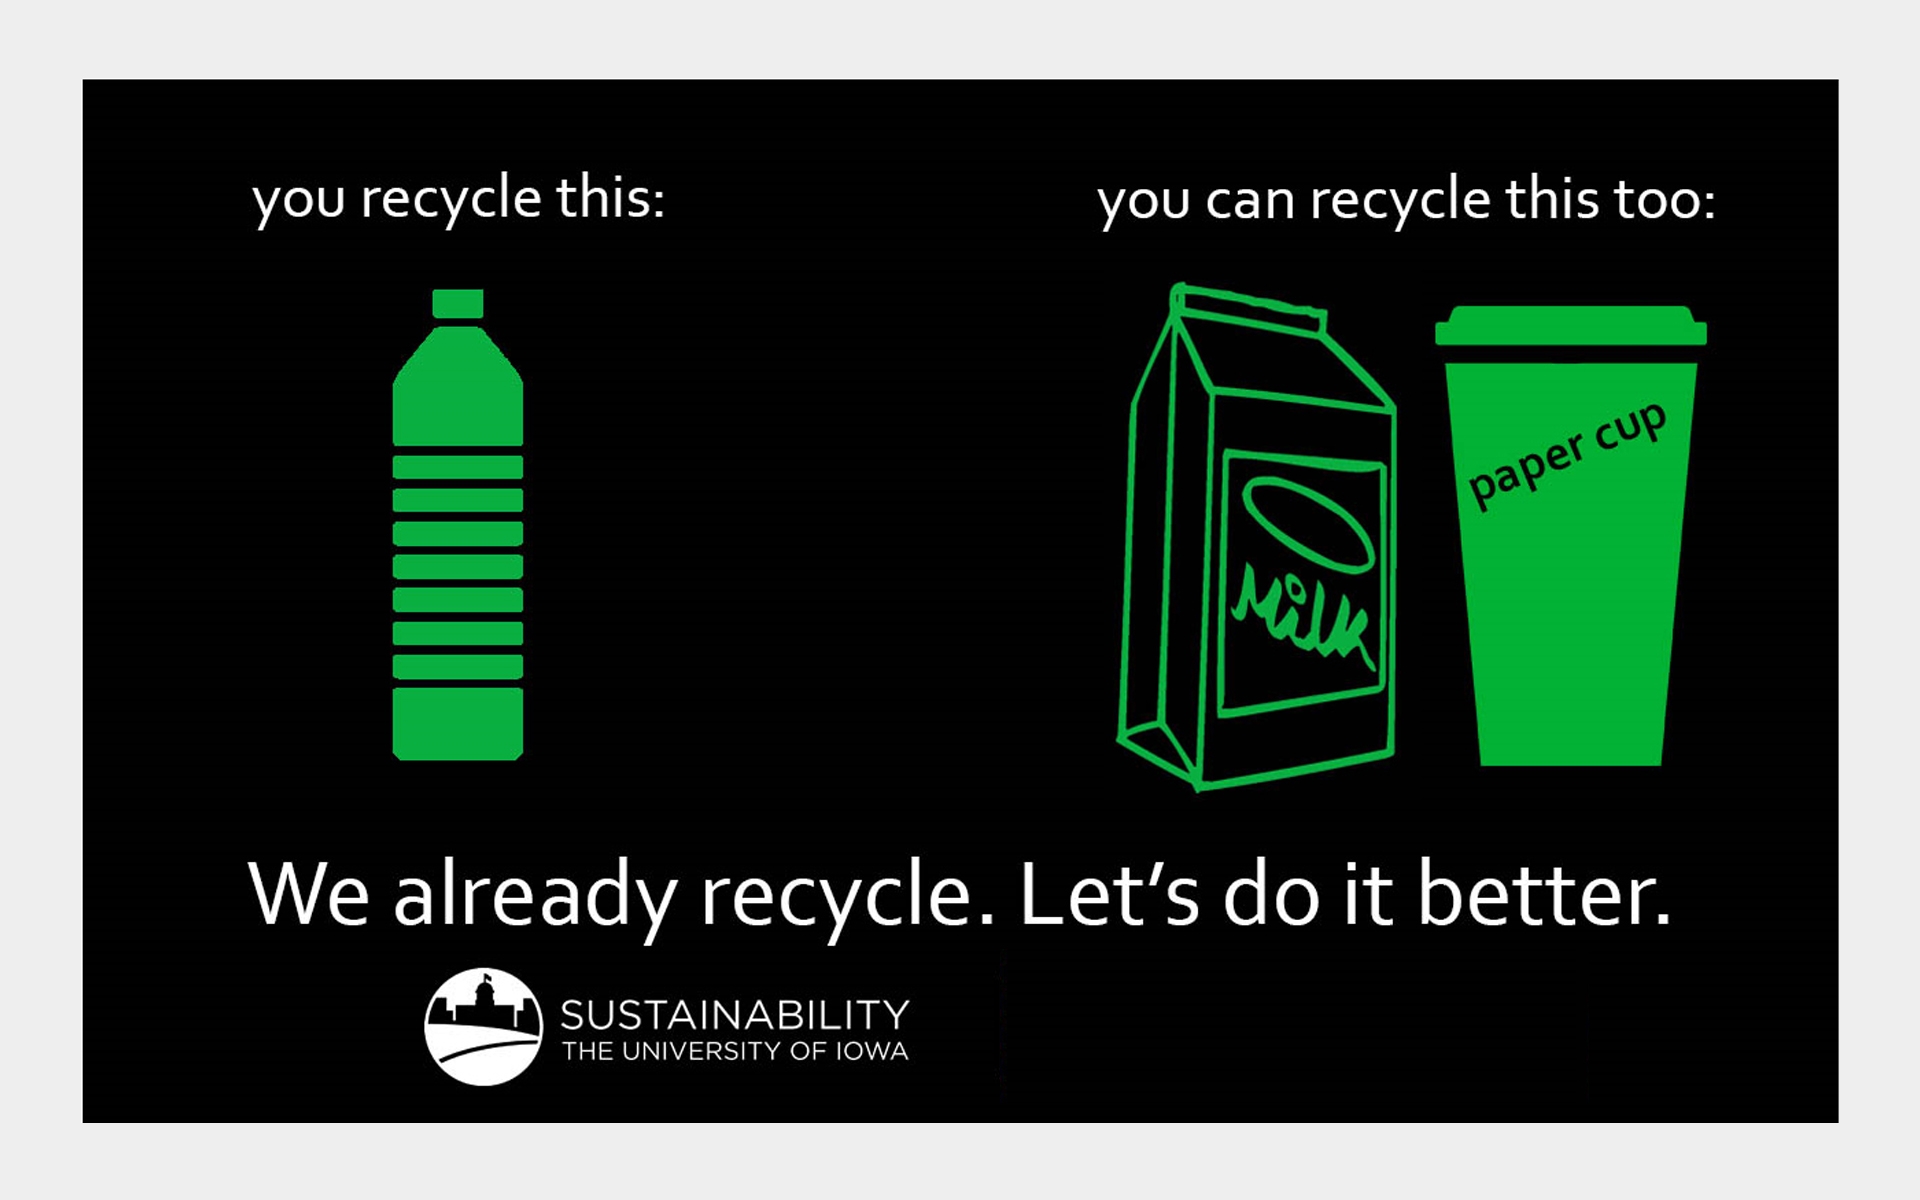 On Campus, you can recycle cartons and unwaxed paper cups in the same bins as cans and plastic bottles